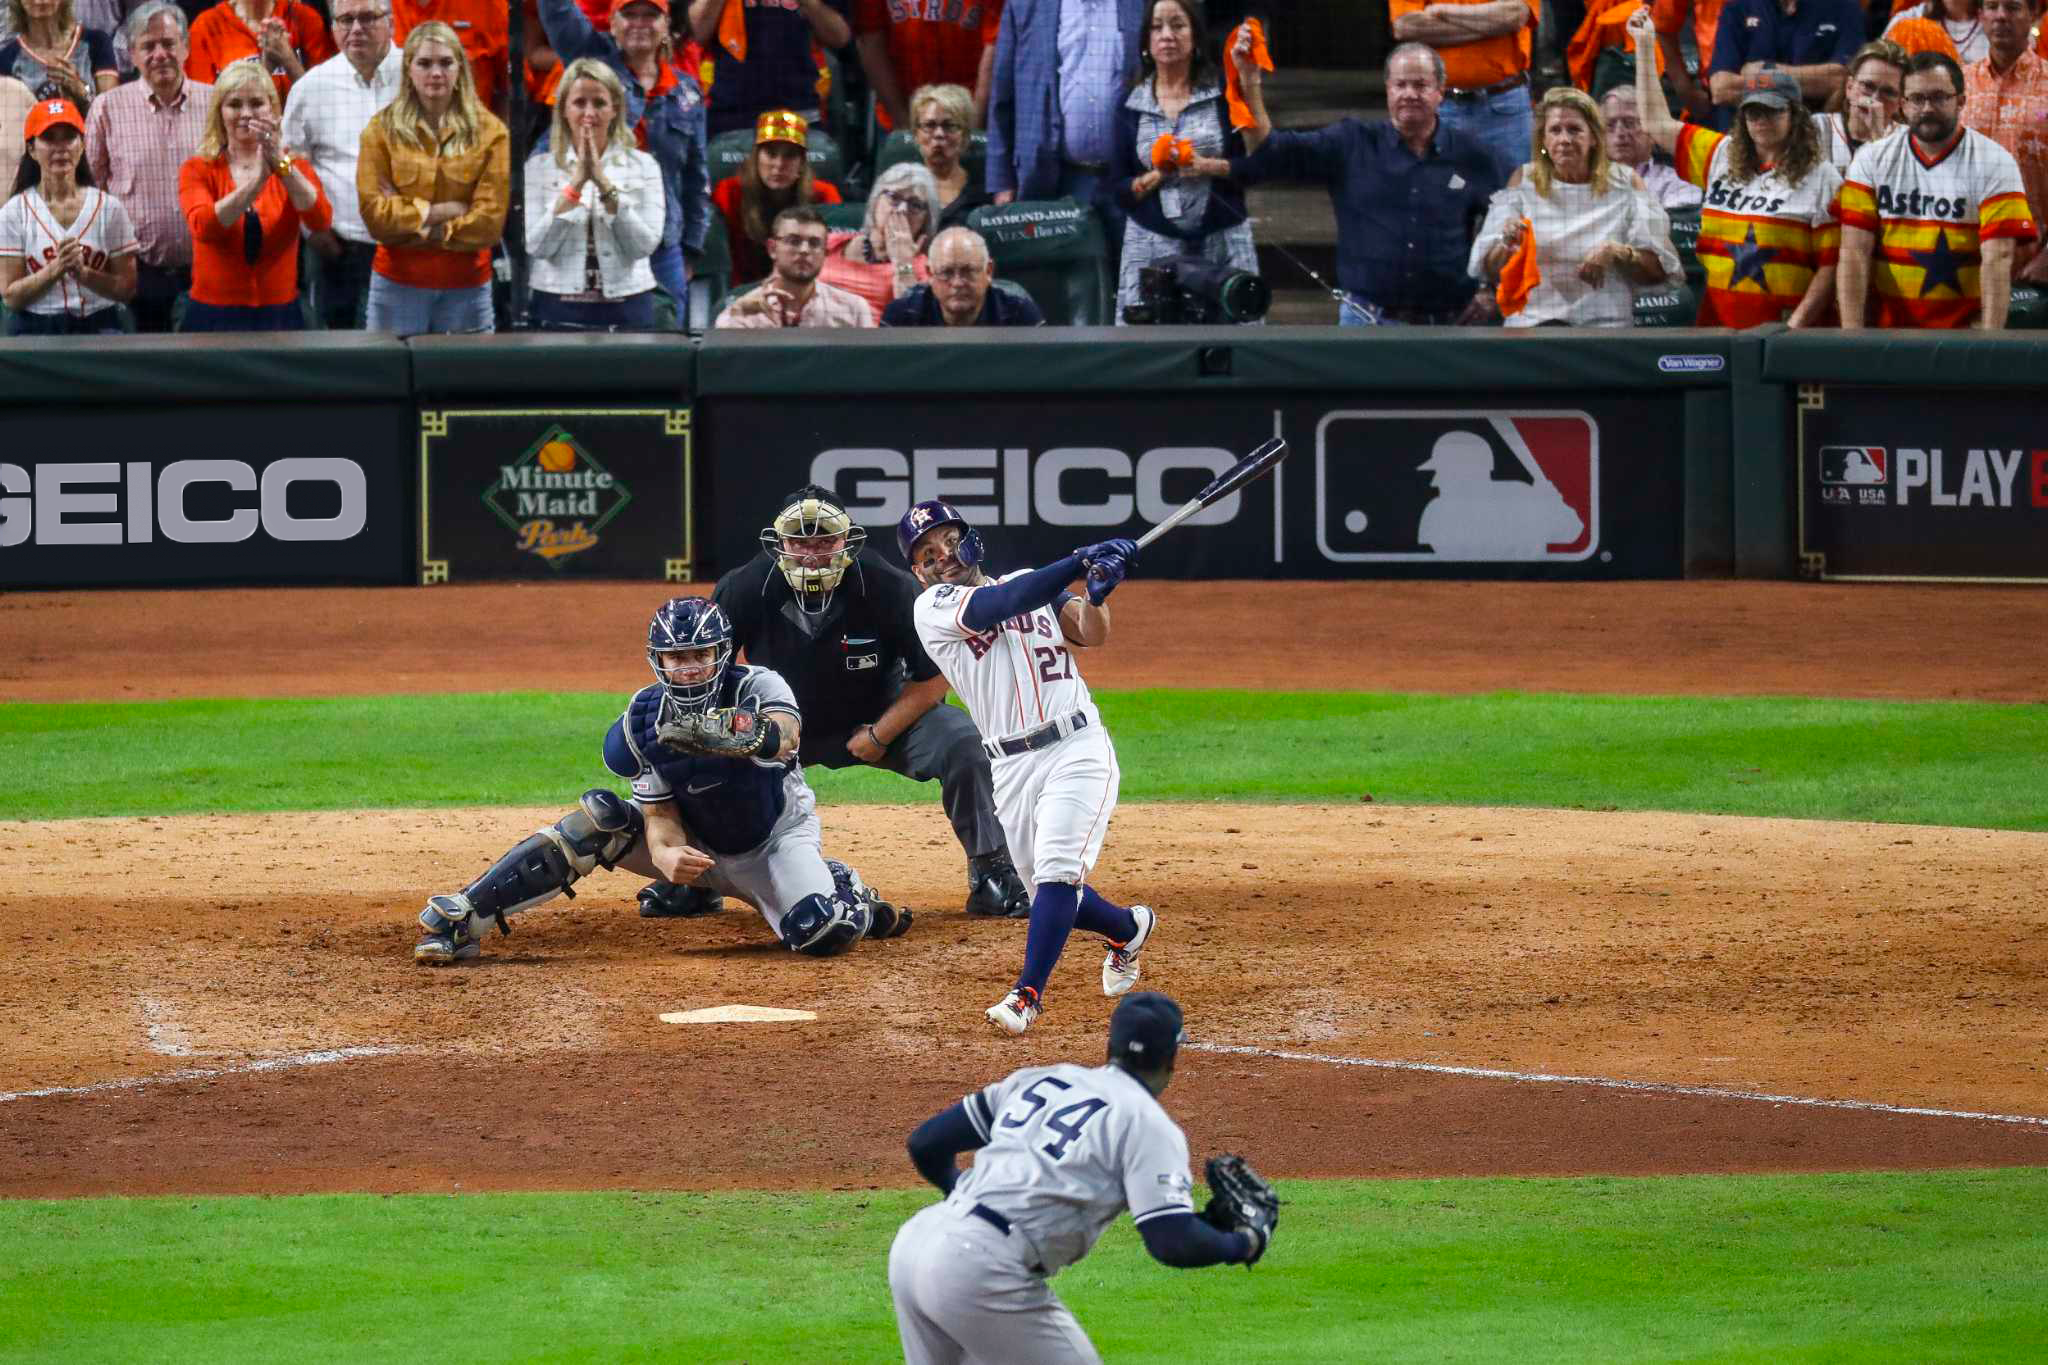 Van Wagner Predicts Biggest Revenue Season Yet for Major League Baseball and TV-Visible Advertising featured image